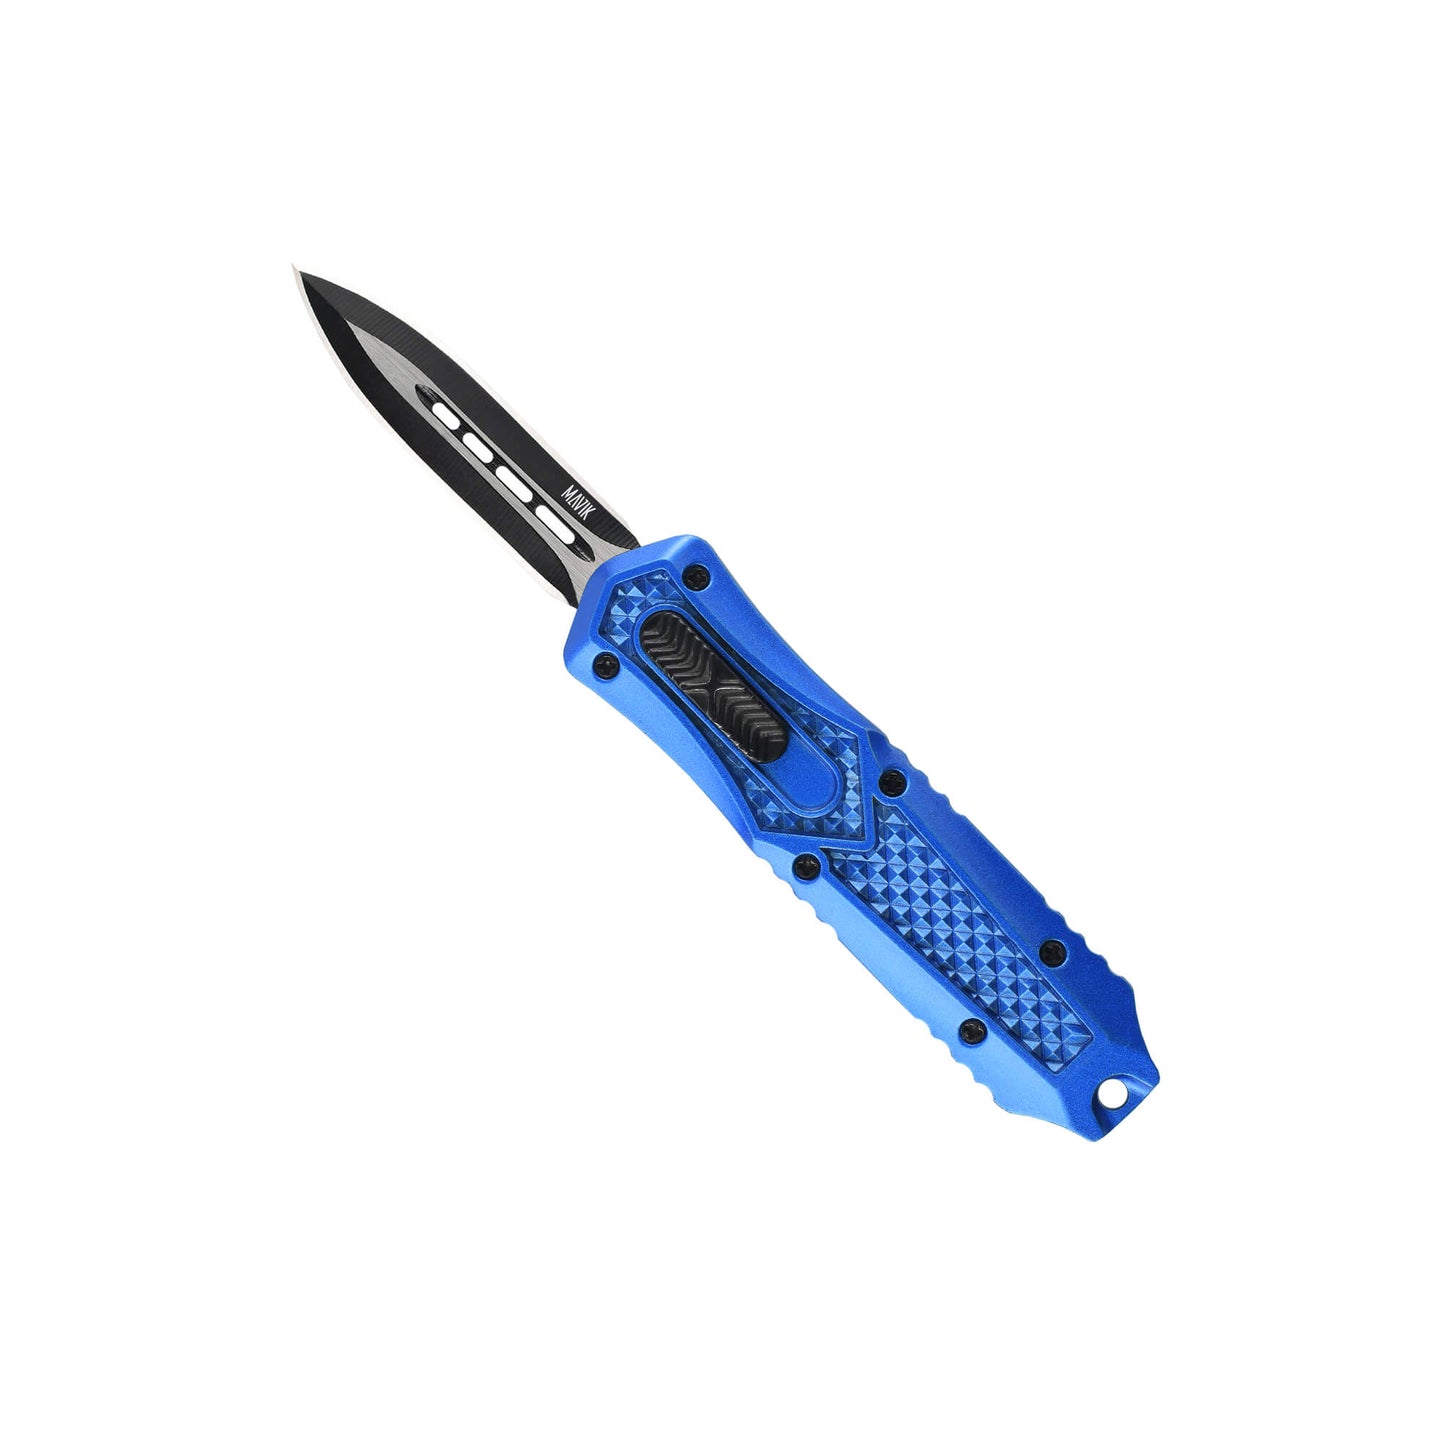 Blue Automatic OTF knife Relik from Mavik Gear with spear point blade, Zinc alloy handle, button lock and lanyard hole.